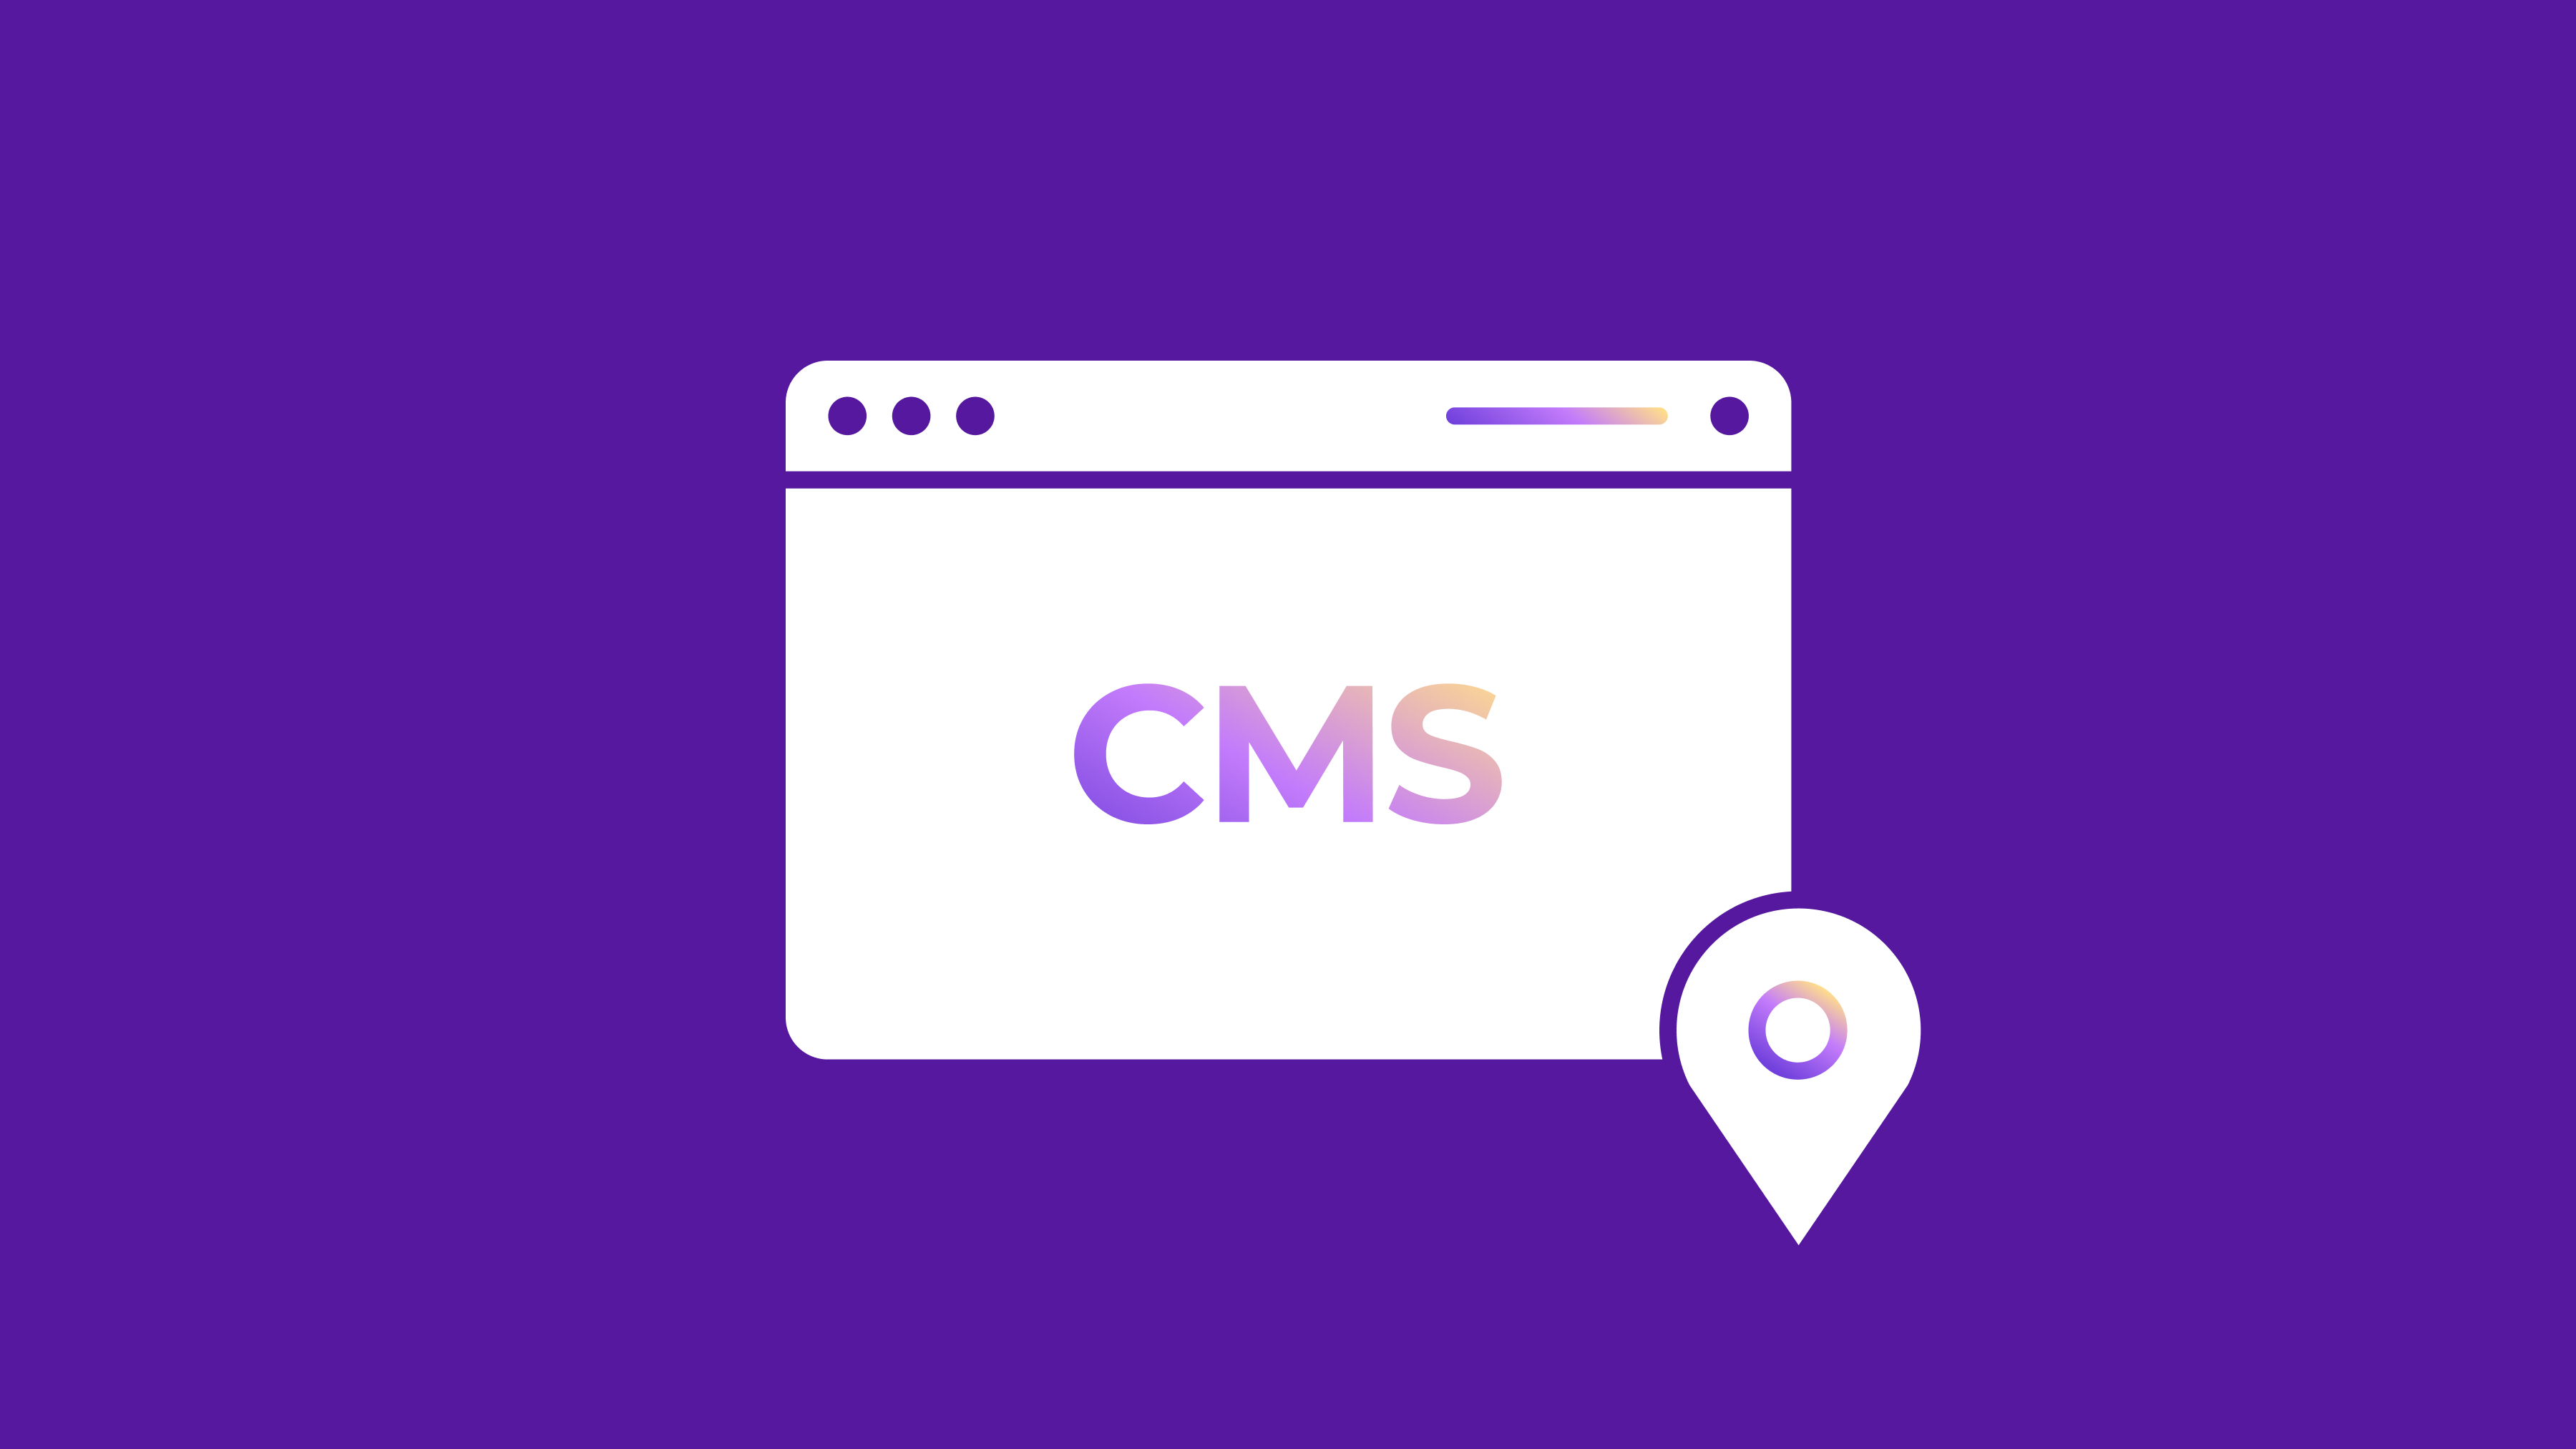 Best practices for fast, accurate CMS localization - Smartling
